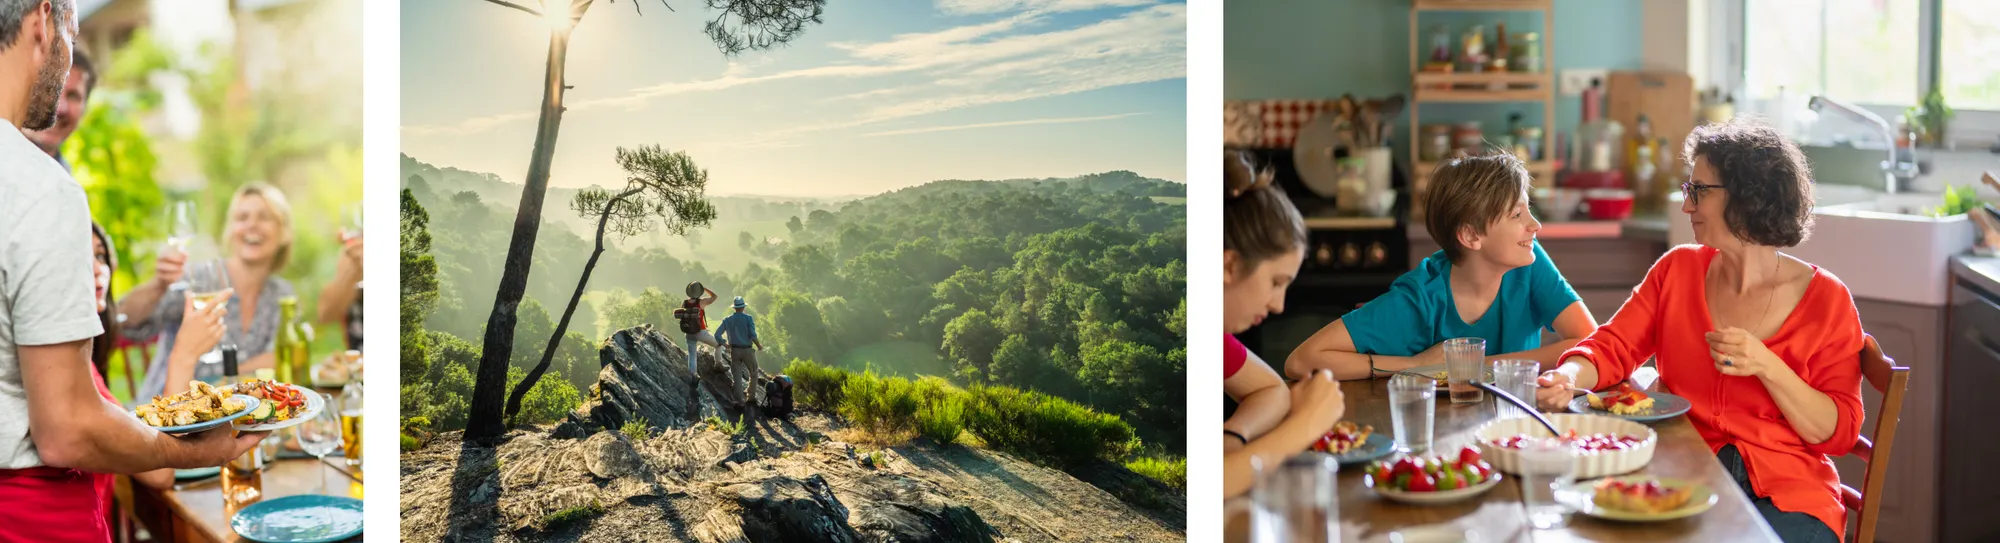 Left image: Focus on a man serving dishes of food to a group of friends. Center image: Hiker couple walk on a mountain trail, overlooking the valley. Right image: The family gathers around the table in the kitchen to enjoy the delicious strawberry tart that Mom just made.